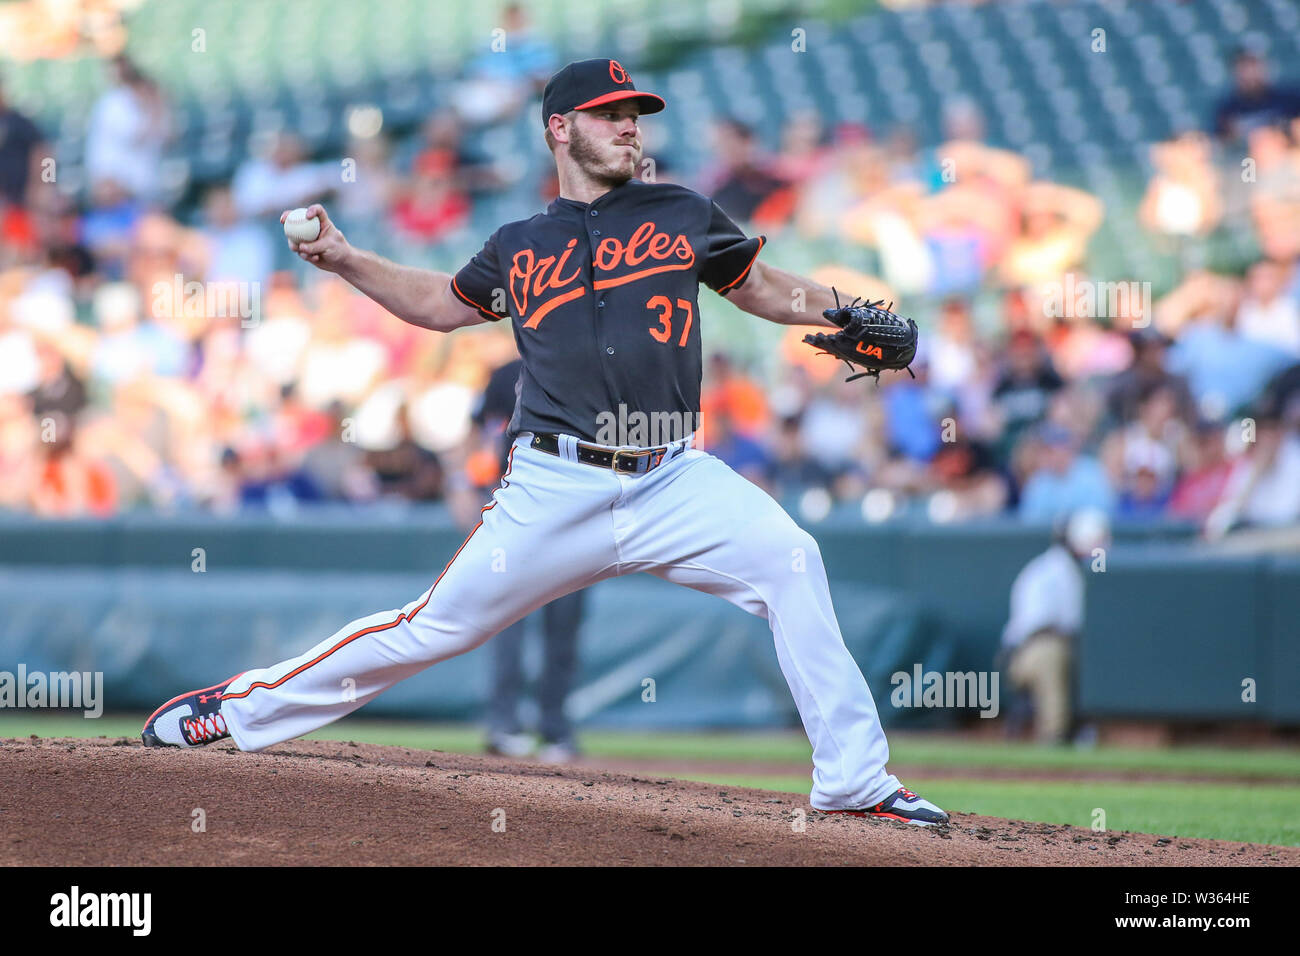 Baltimore, MD, USA. 12th July, 2019. during MLB action between the Tampa Bay Rays and the Baltimore Orioles at Camden Yards in Baltimore, MD. Jonathan Huff/CSM/Alamy Live News Stock Photo